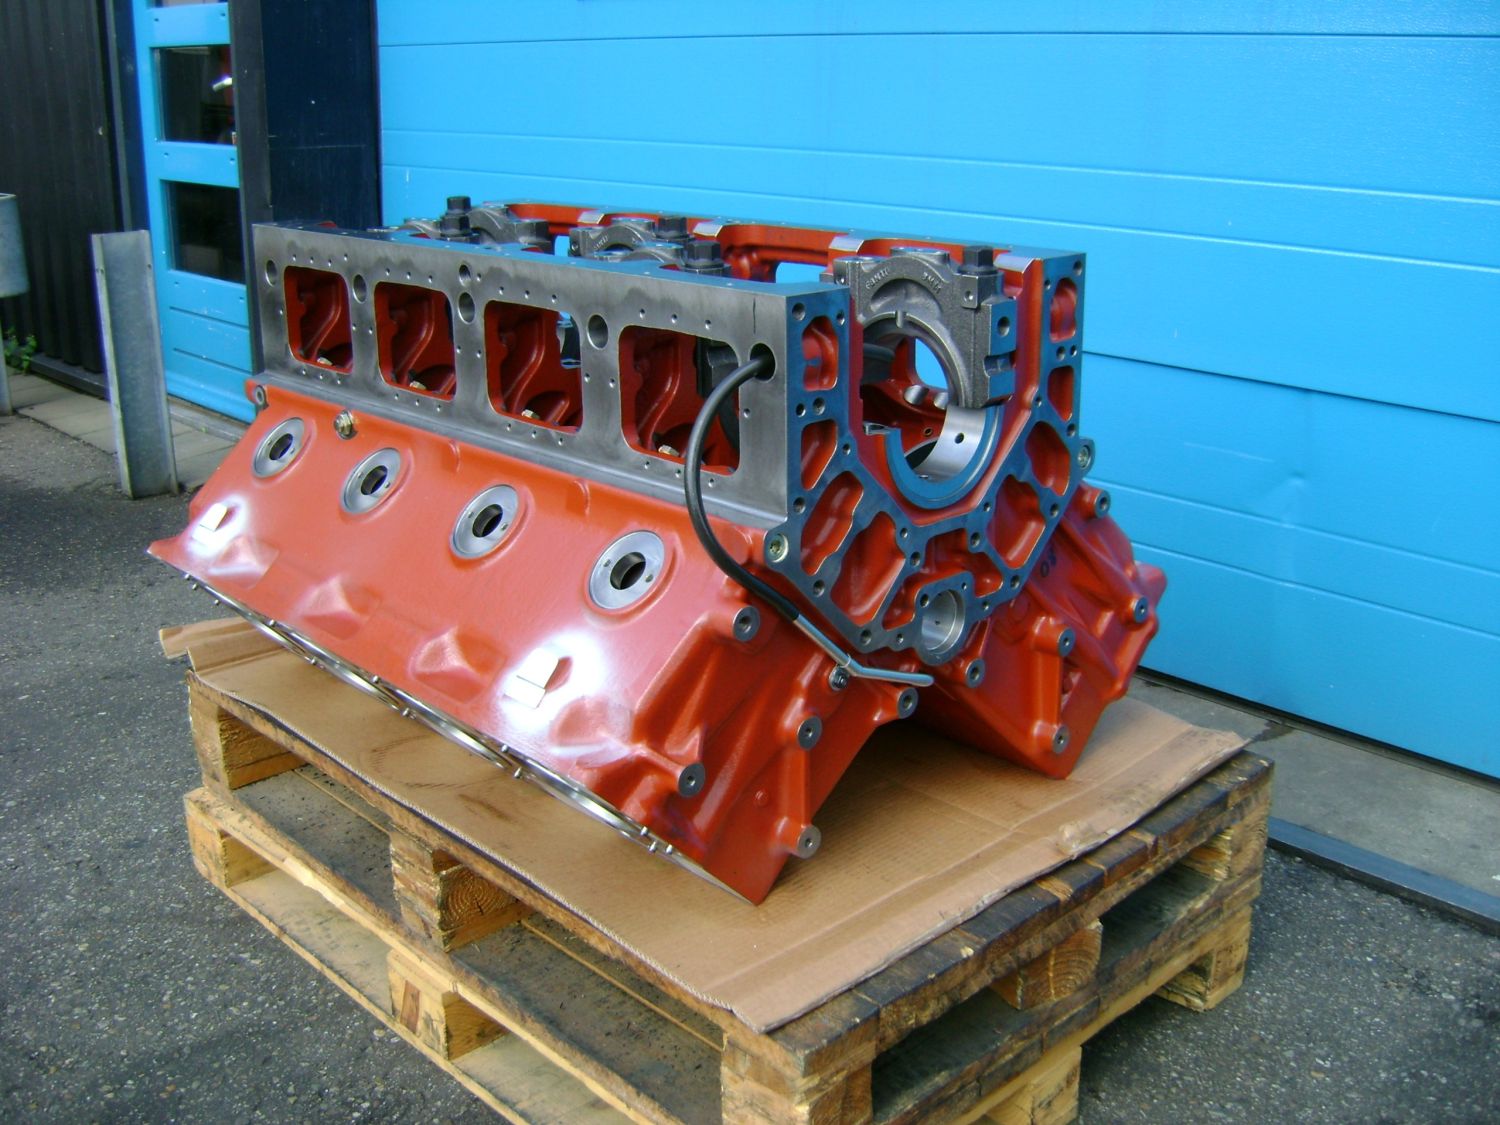 Supply of a brand new engine block for Baudouin engine